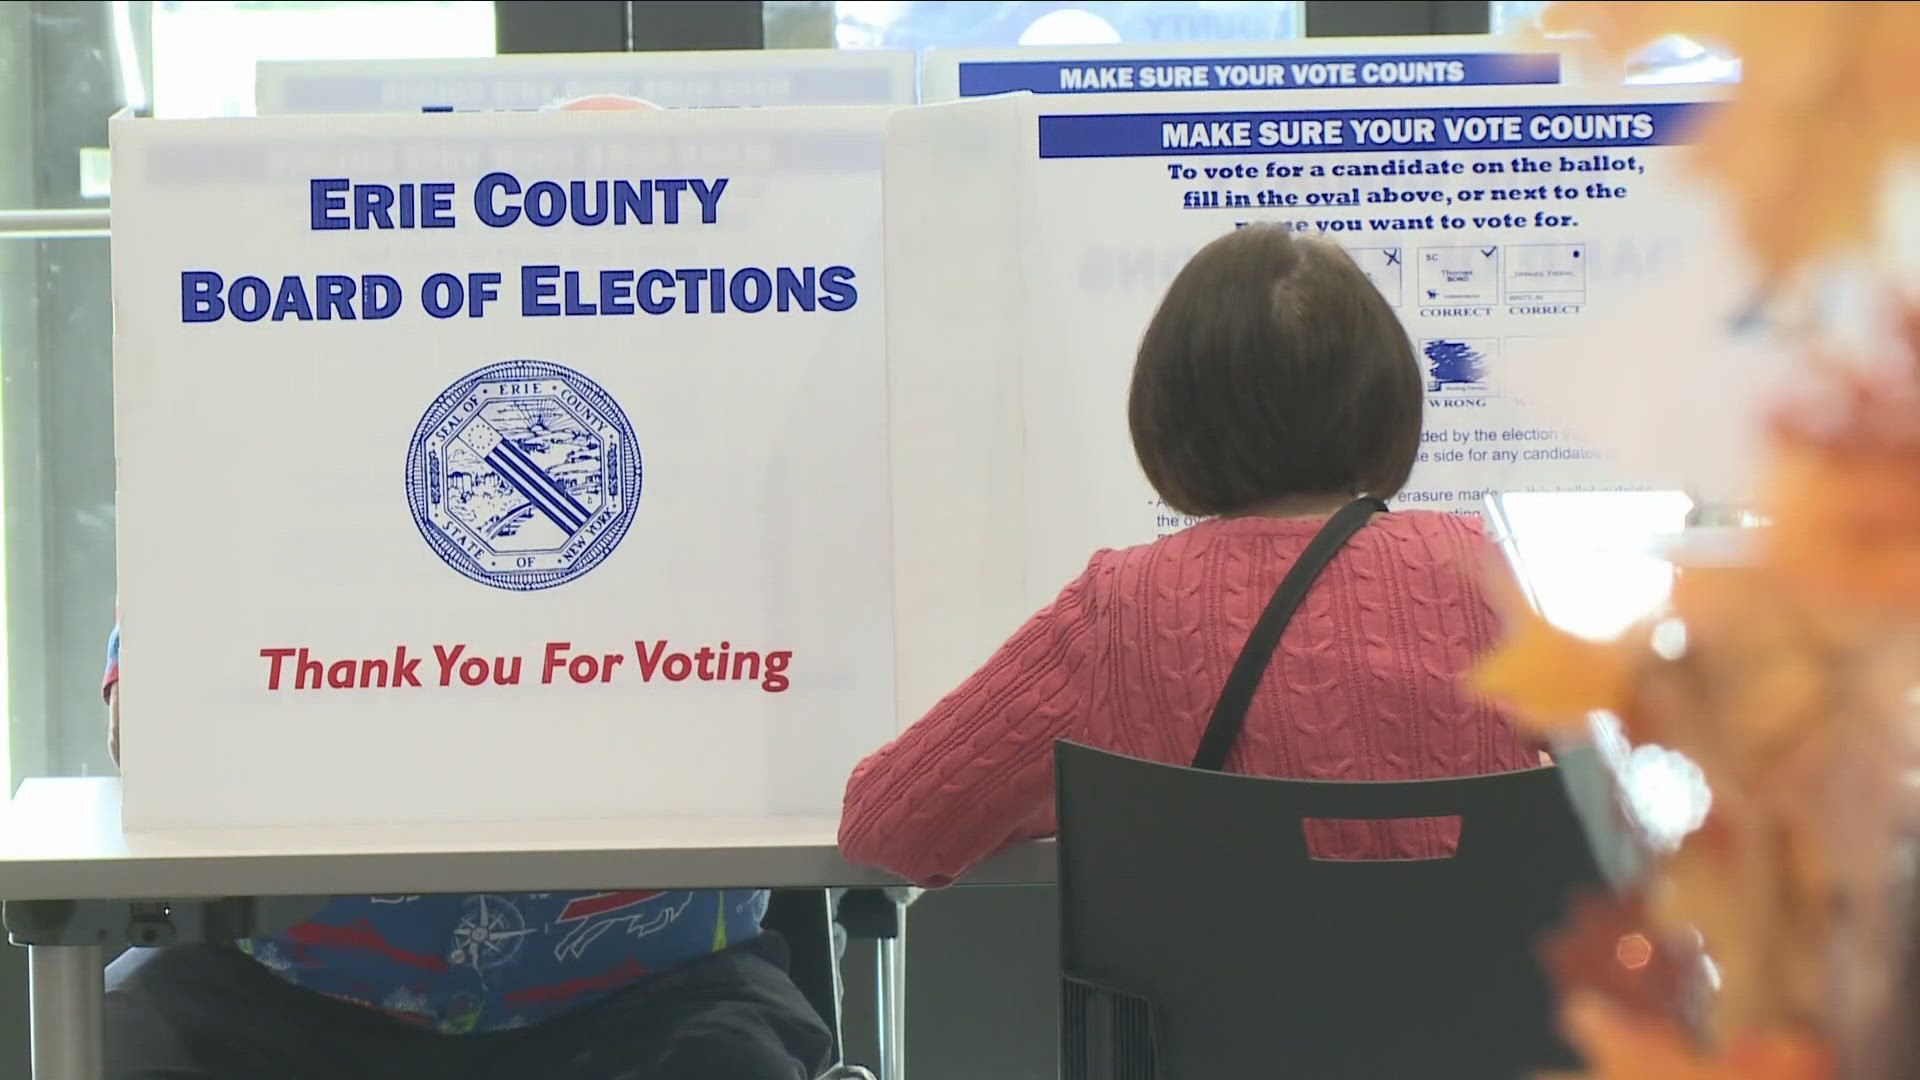 Registered voters have until Sunday, November 5 to vote early, otherwise they'll have to wait until election day.